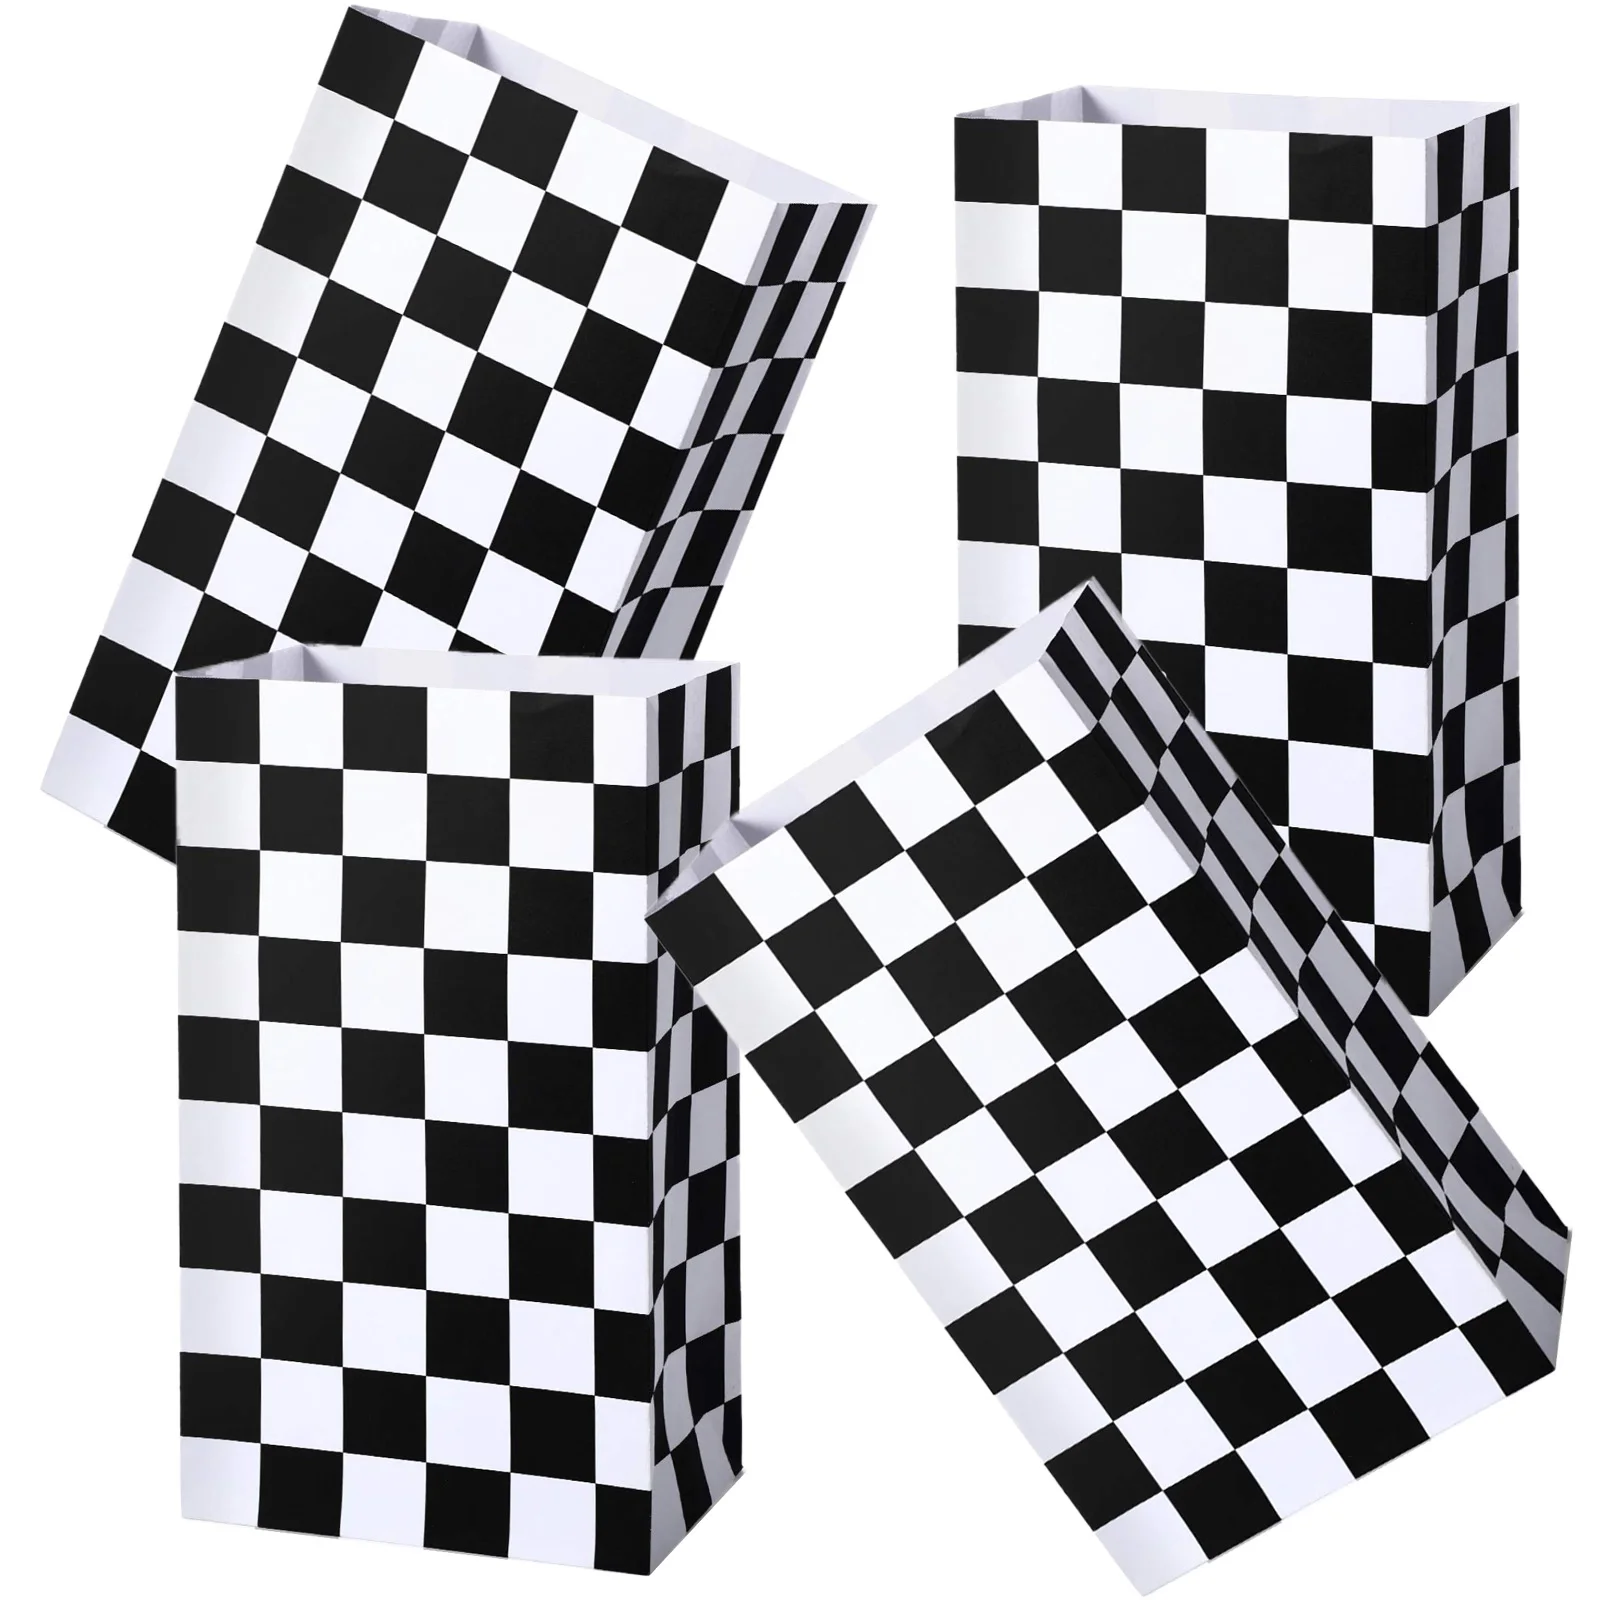 

16Pcs Race Car Birthday Party Decorations Checkered Racing Treat Bags Black and White Bags Goodie Bags Candy Bags